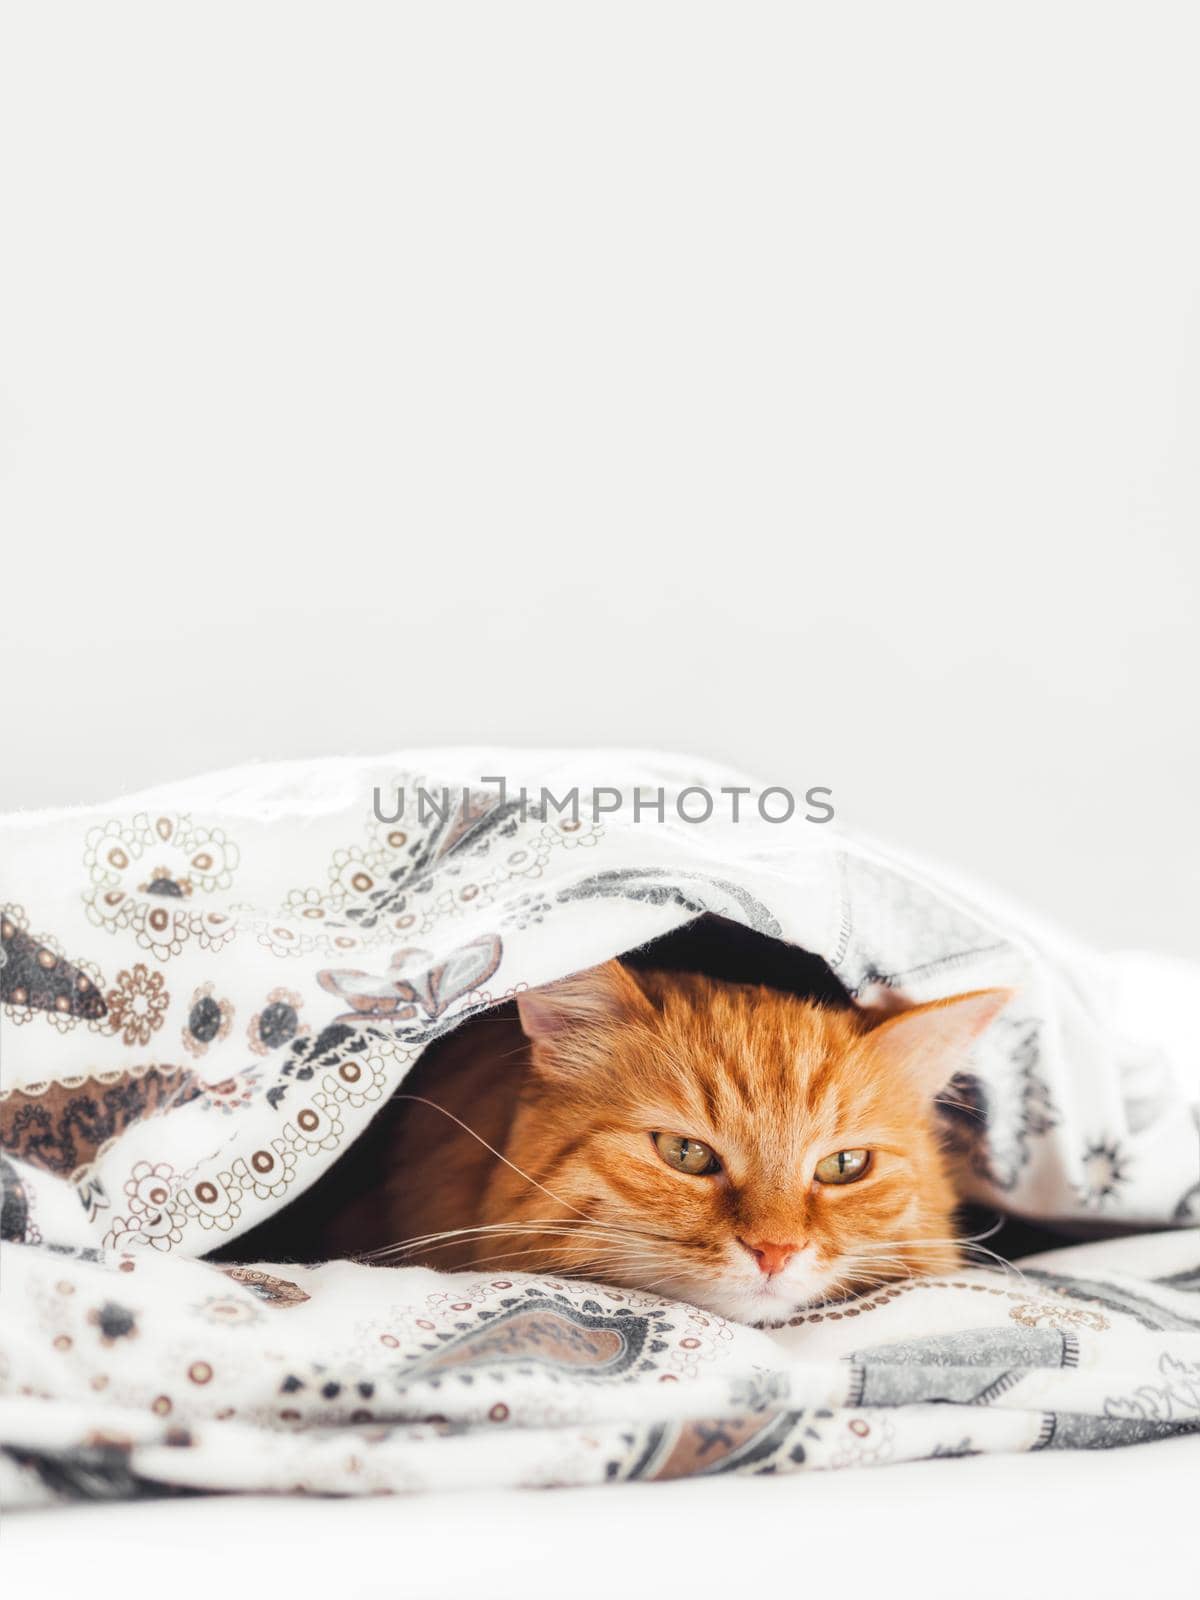 Cute ginger cat lying under blanket in bed. Fluffy pet comfortably settled to sleep. Cozy home background with copy space. by aksenovko